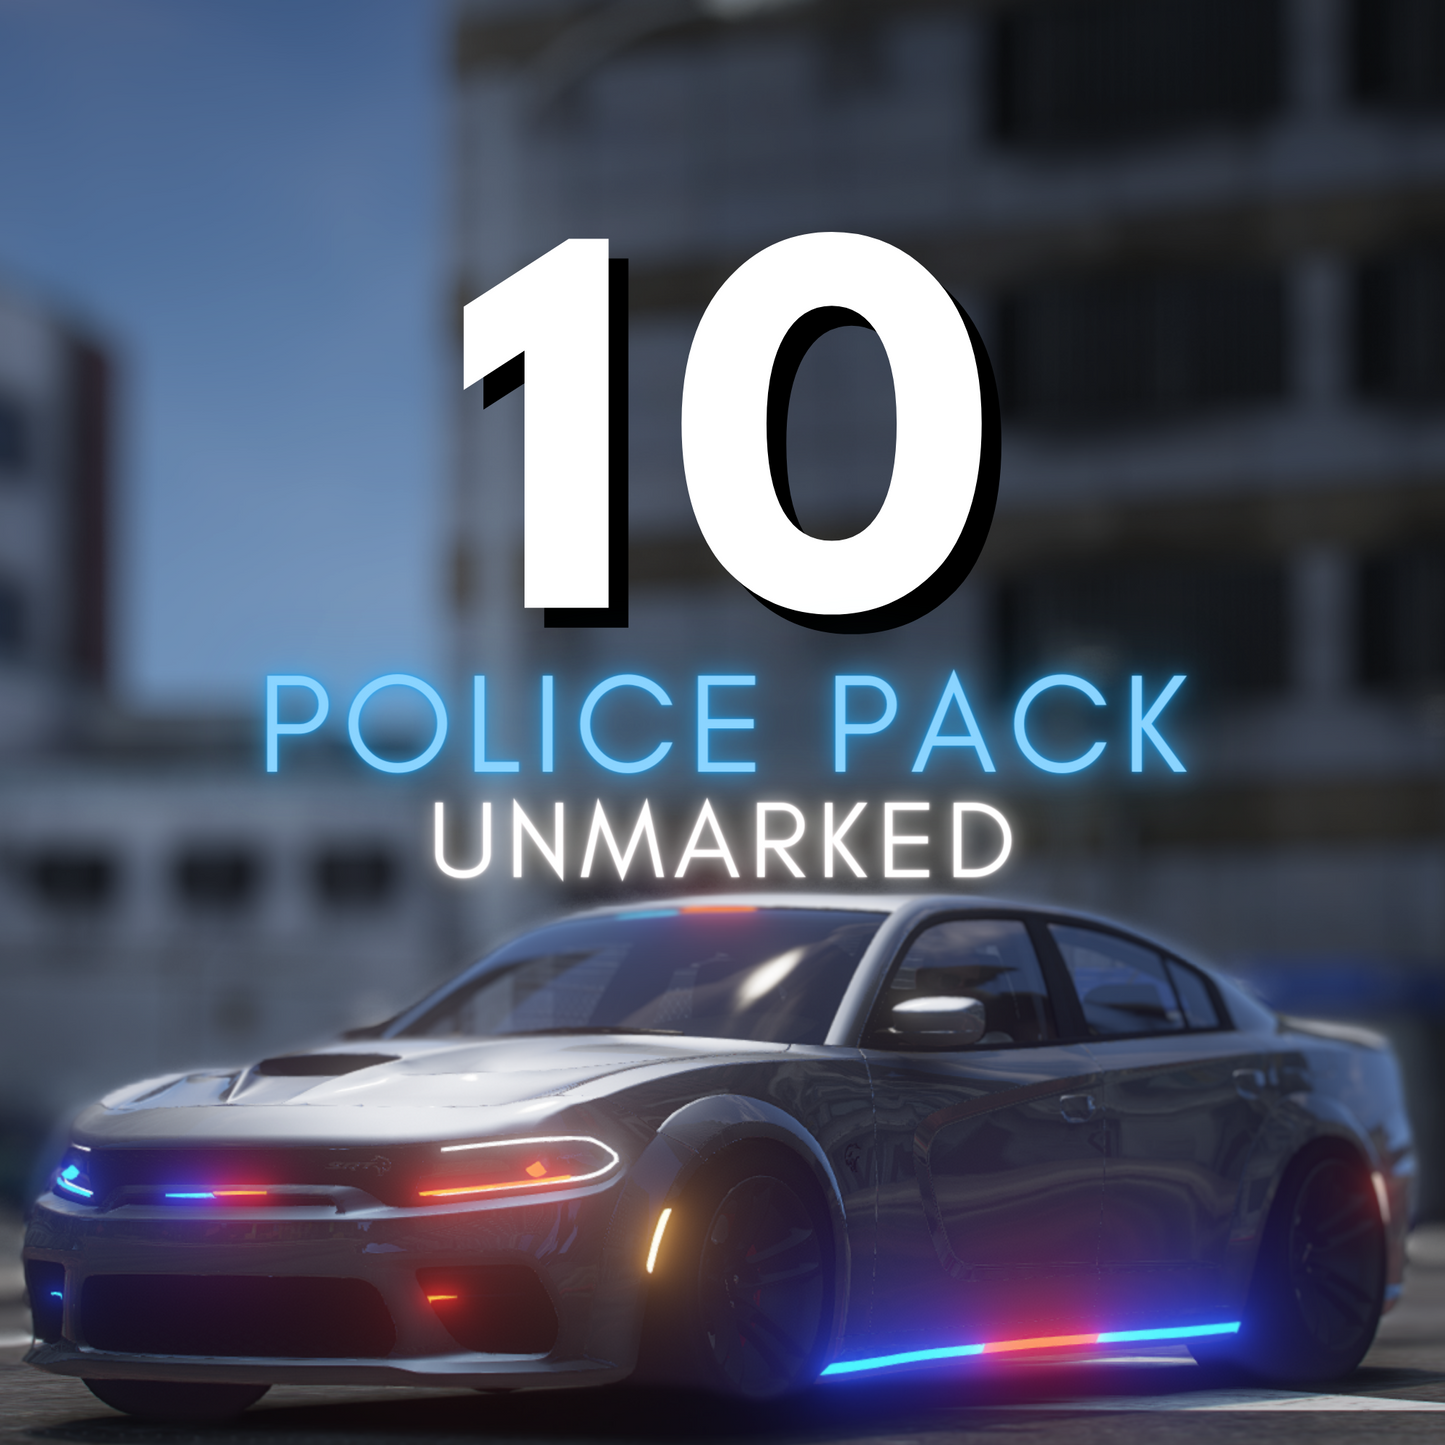 Police Unmarked Car Pack | 10 Vehicles